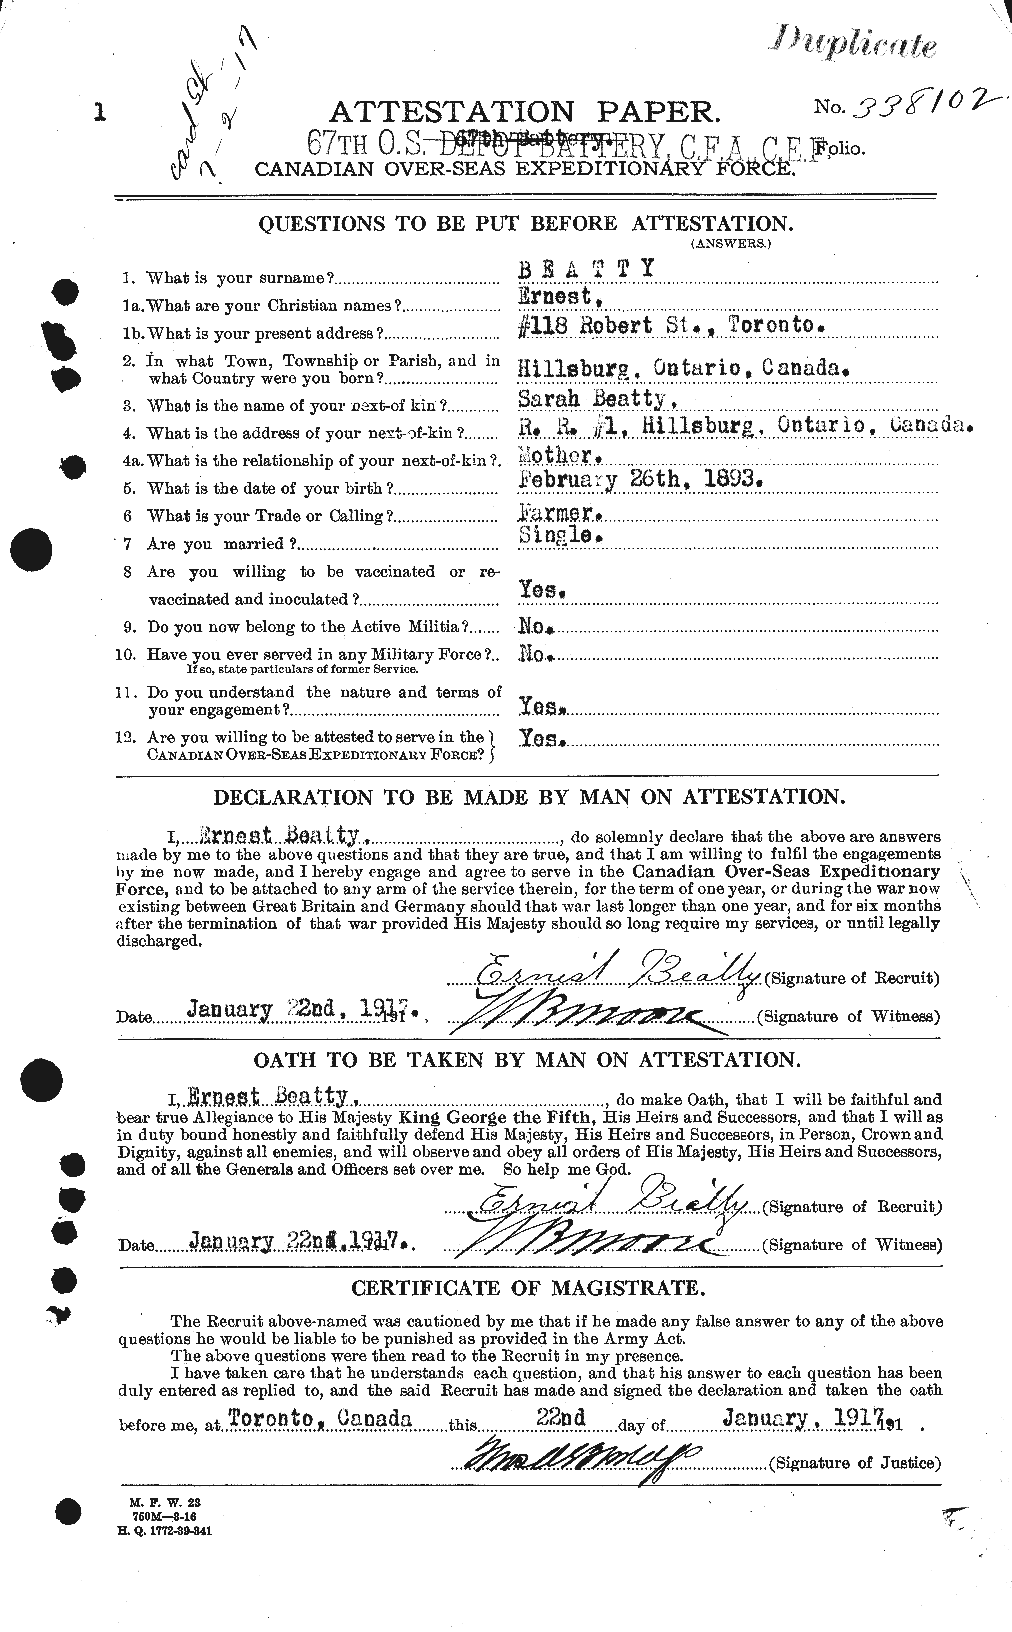 Personnel Records of the First World War - CEF 236362a